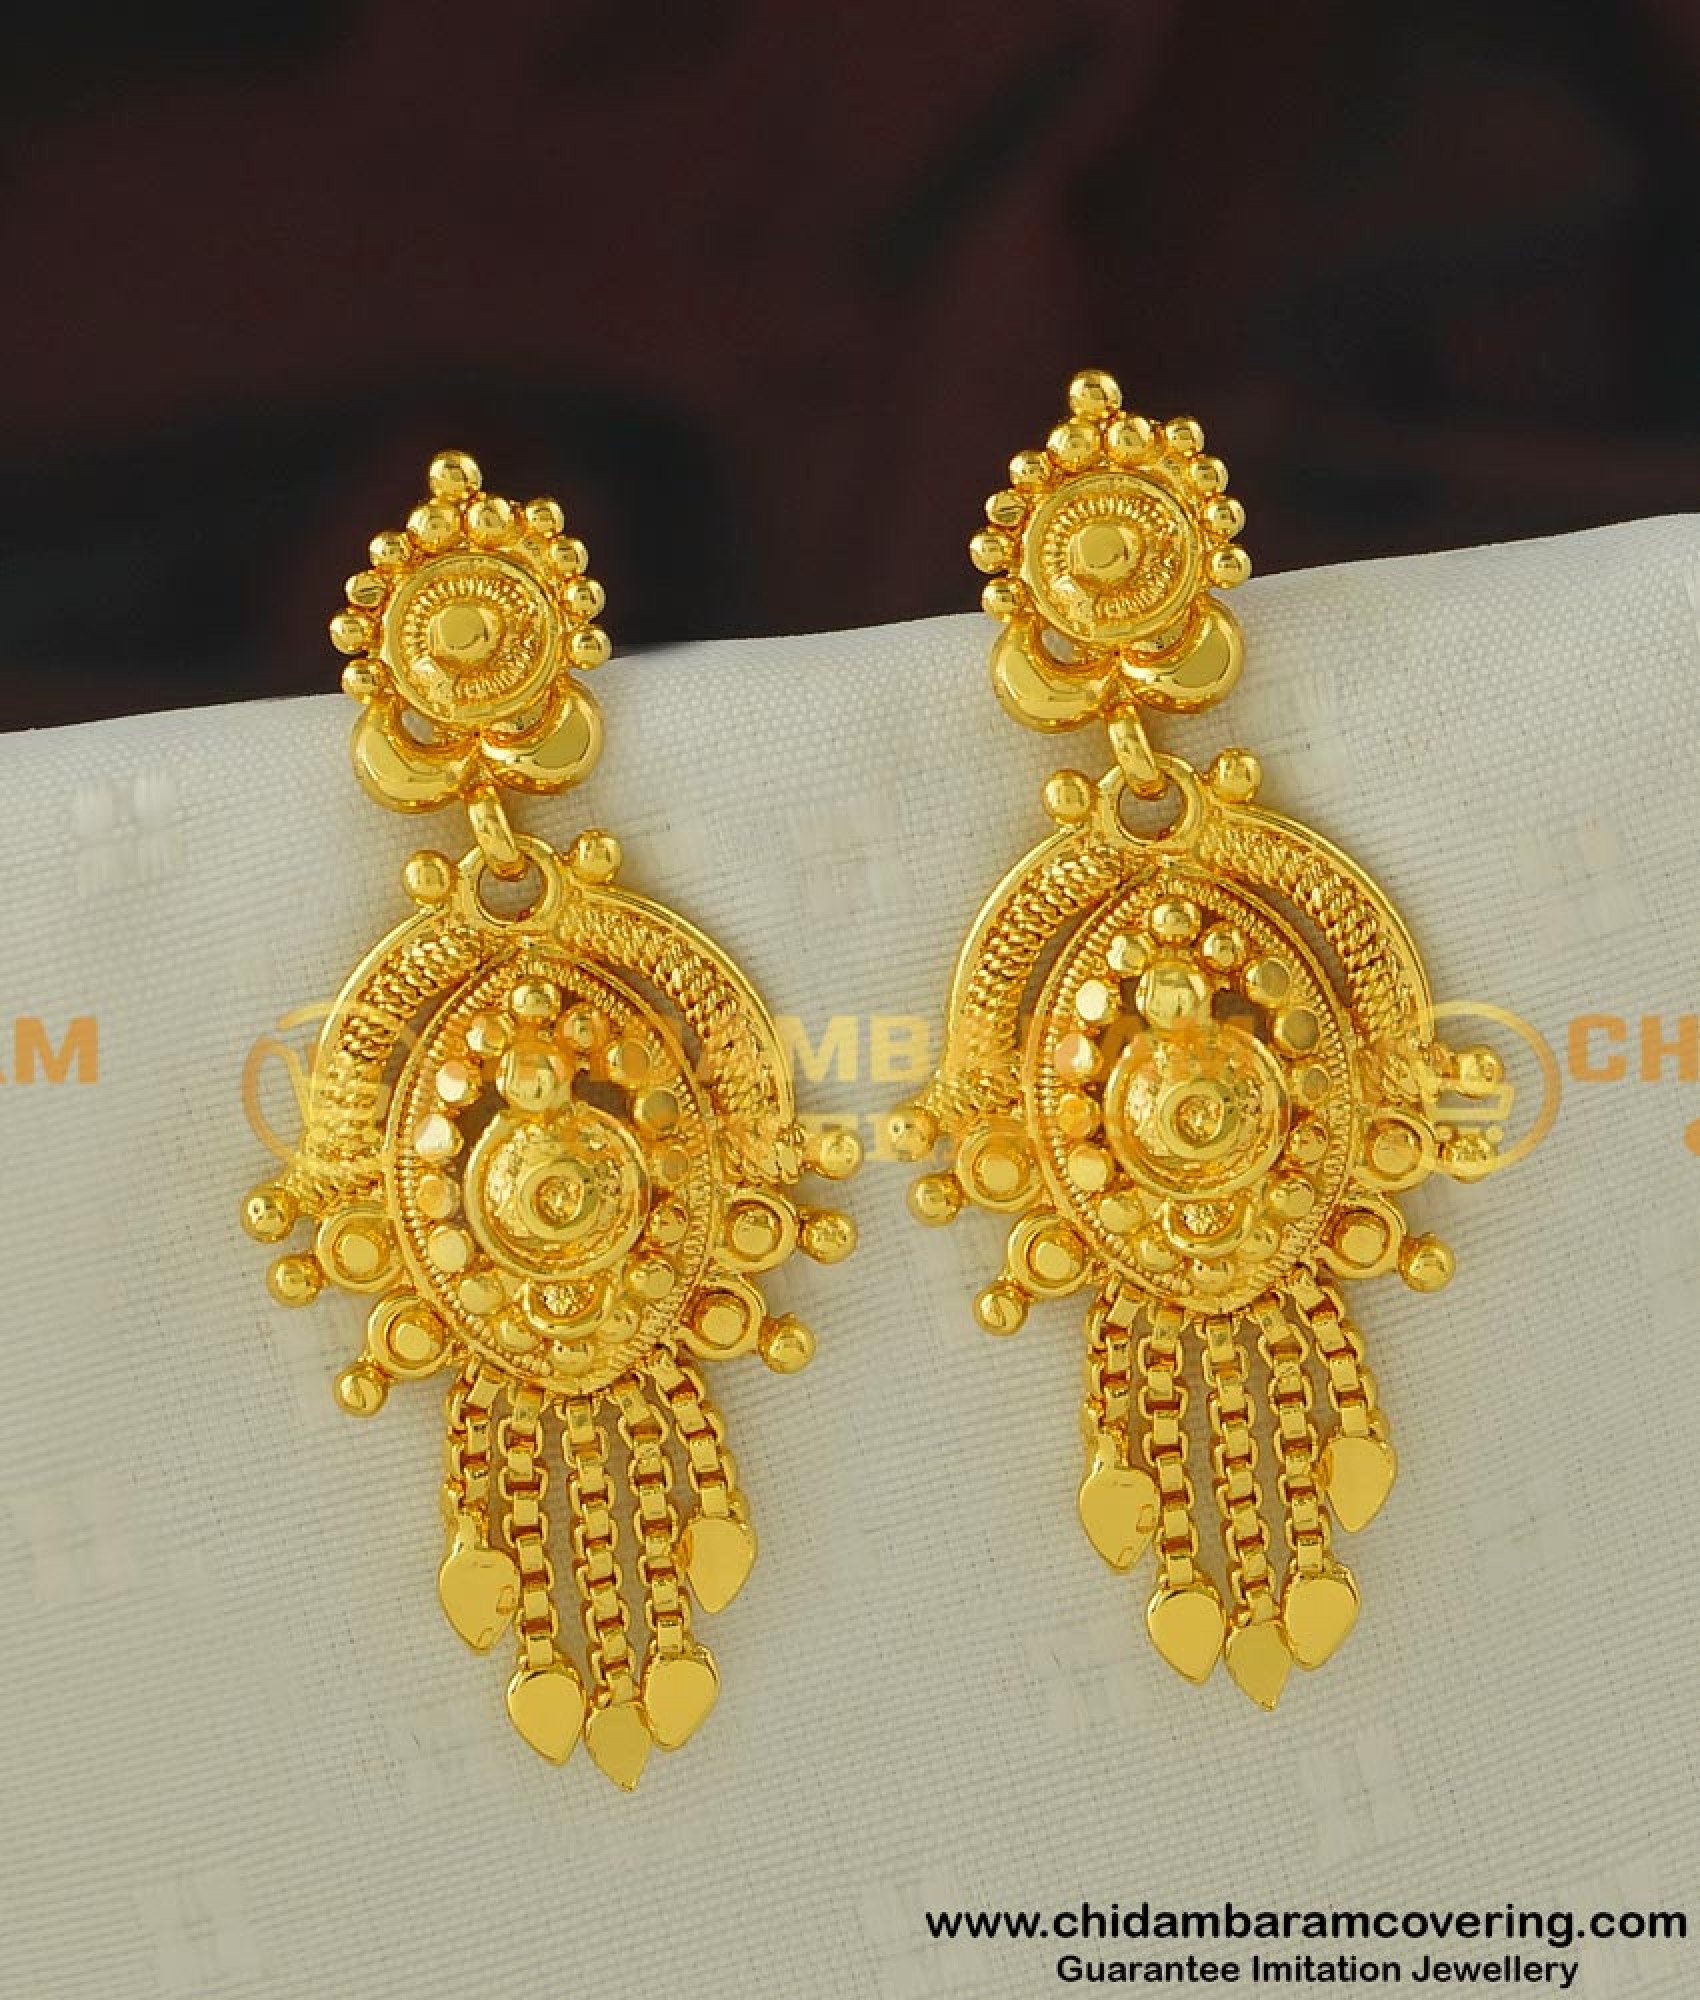 Buy Daily Wear Light Weight Gold Inspired Earrings Gold Covering ...